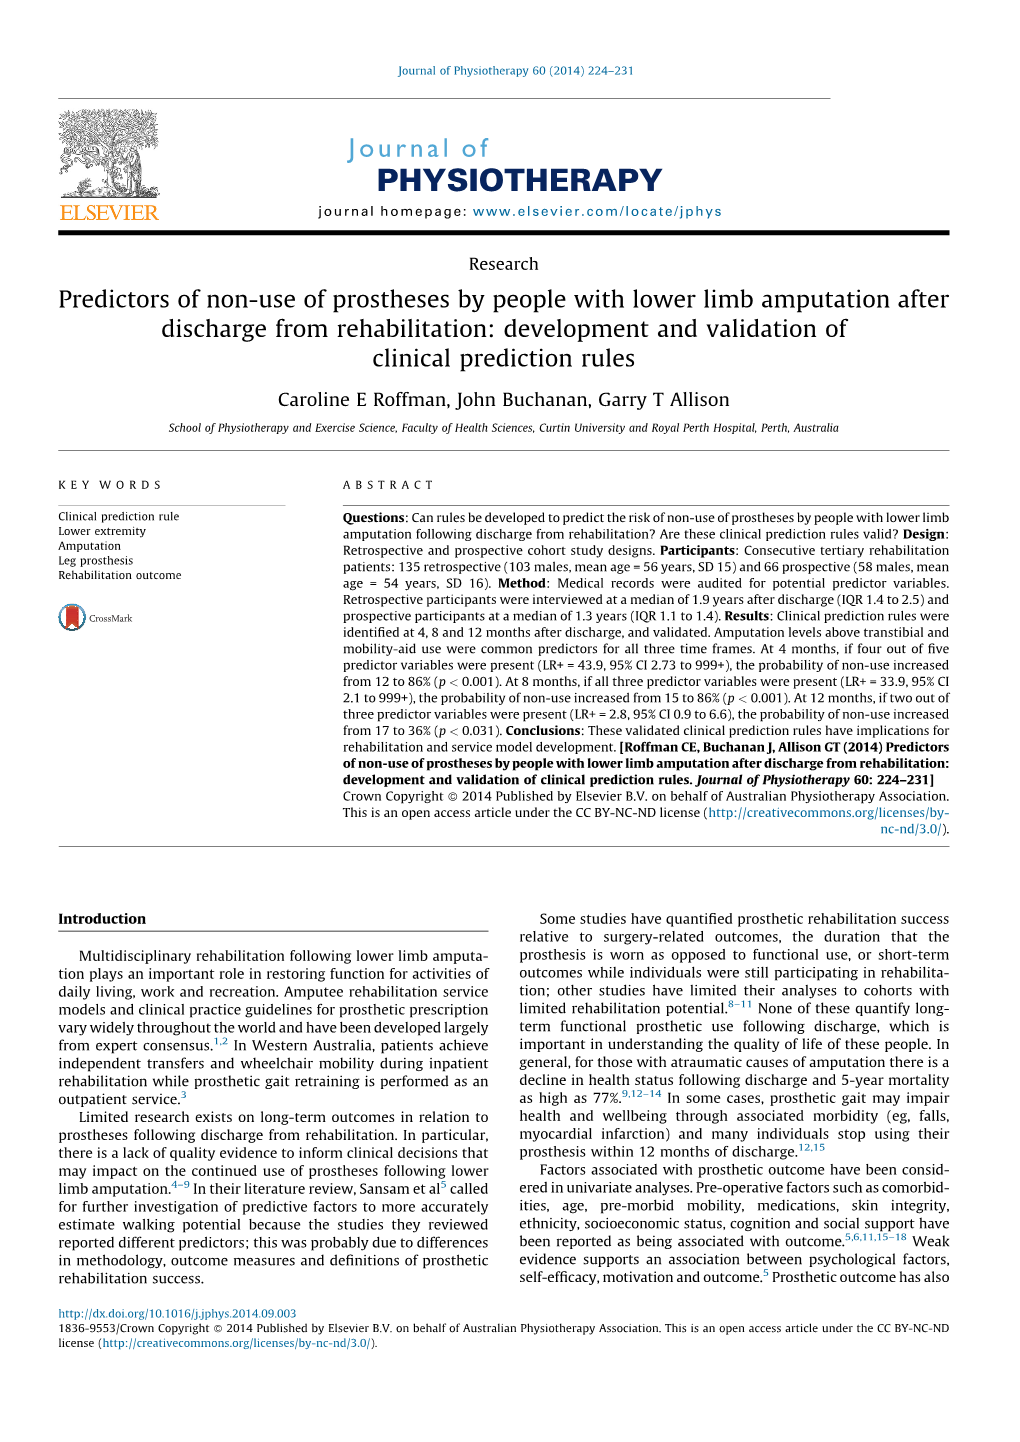 Predictors of Non-Use of Prostheses by People with Lower Limb Amputation After Discharge from Rehabilitation: Development and Validation of Clinical Prediction Rules